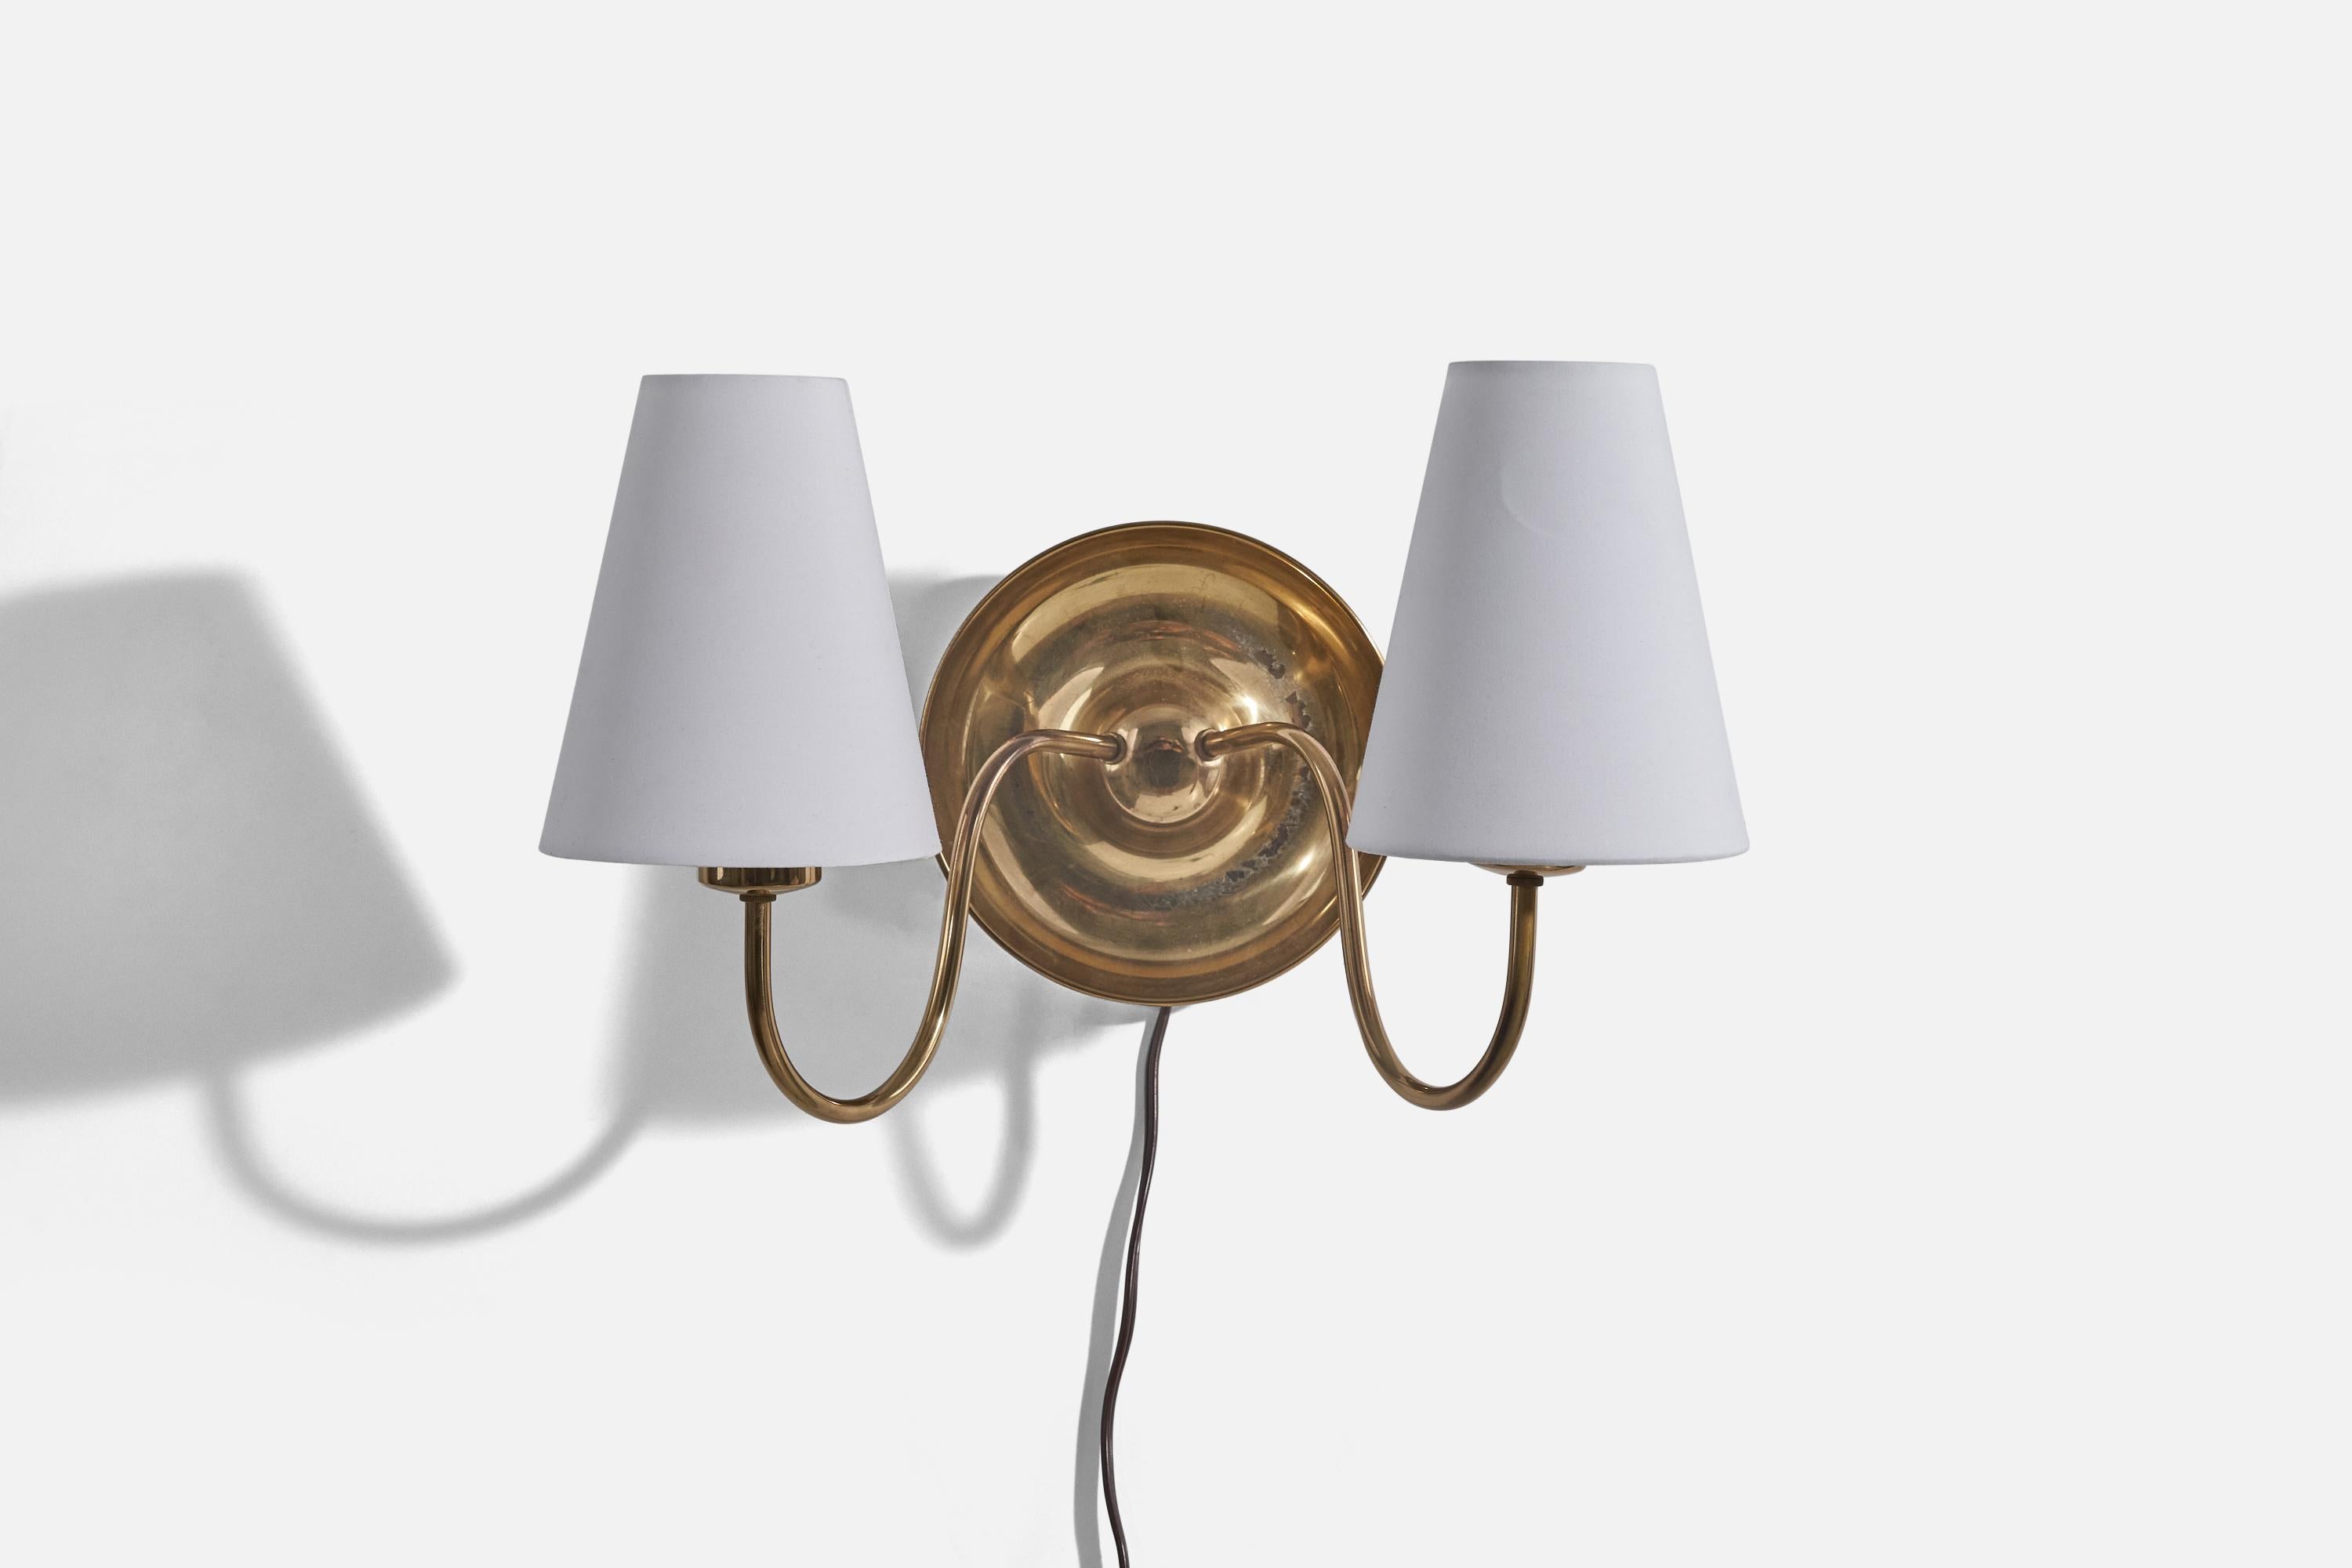 A brass and fabric wall light designed and produced by Josef Frank, Sweden, 1950s. 

Sold with lampshade.
Dimensions of sconce (inches) : 8.375 x 12.5625 x 10 (H x W x D)
Dimensions of shade (inches) : 2.875 x 5.5 x 6.75 (T x B x H)
Dimensions